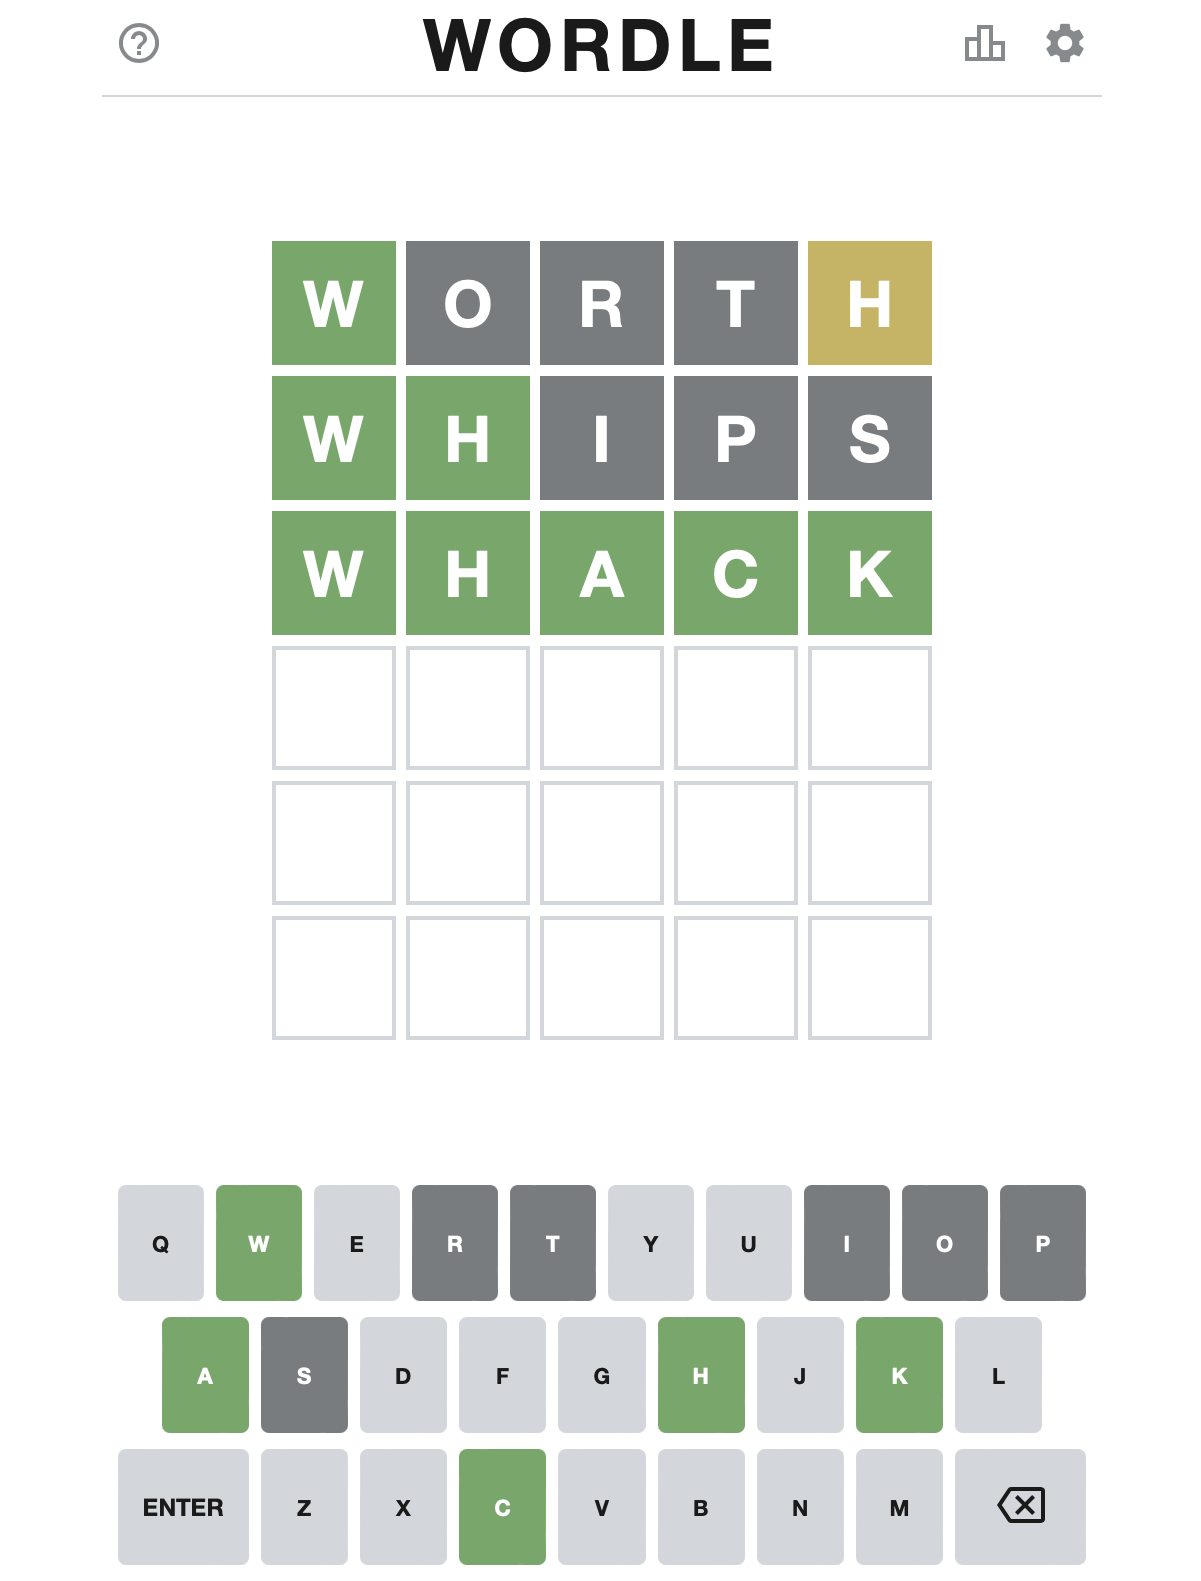 Example of a Wordle board showing 5-letter words, in this case "Whack", black squares, yellow squares and green squares, which indicated how close you are to solving the puzzle